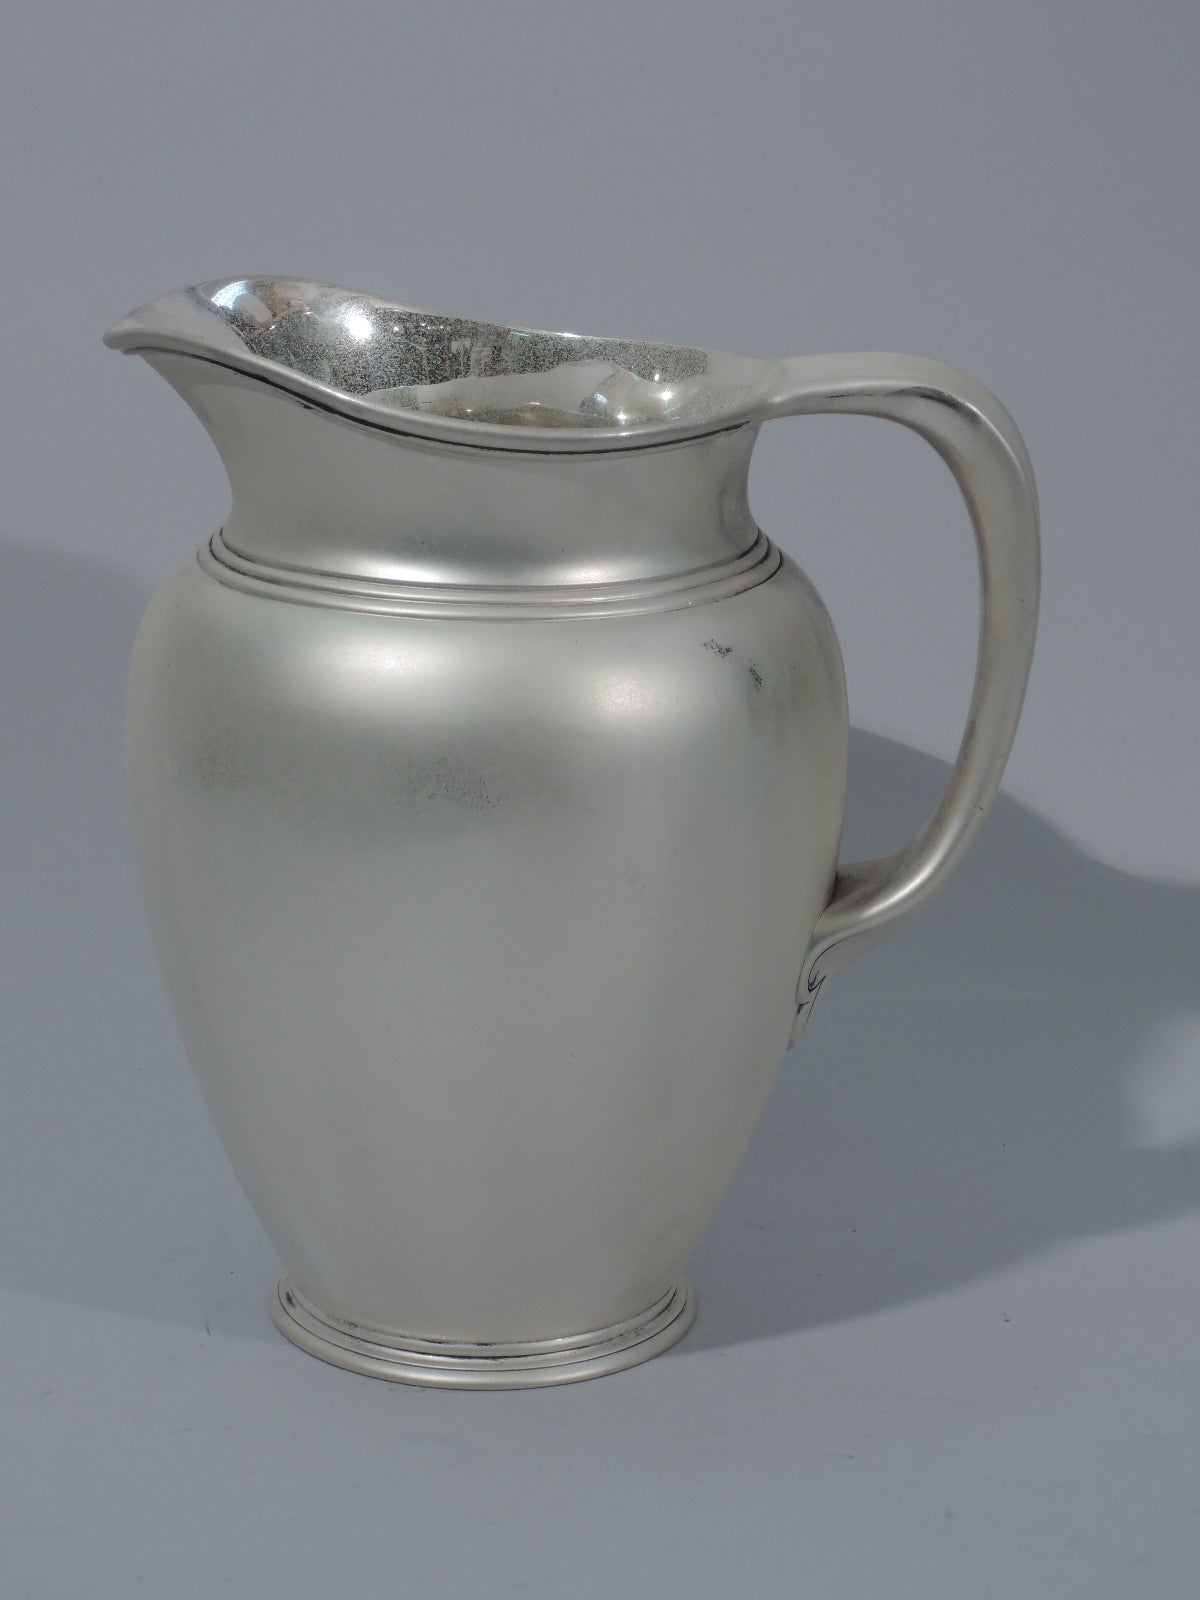 Sterling silver water pitcher. Made by Tiffany & Co. in New York, circa 1907. Ovoid body, raised foot, soft bracket handle, and molded mouth with lip spout. Chased bands at neck base. Spare and heavy. The pattern (no. 16974) was first produced in